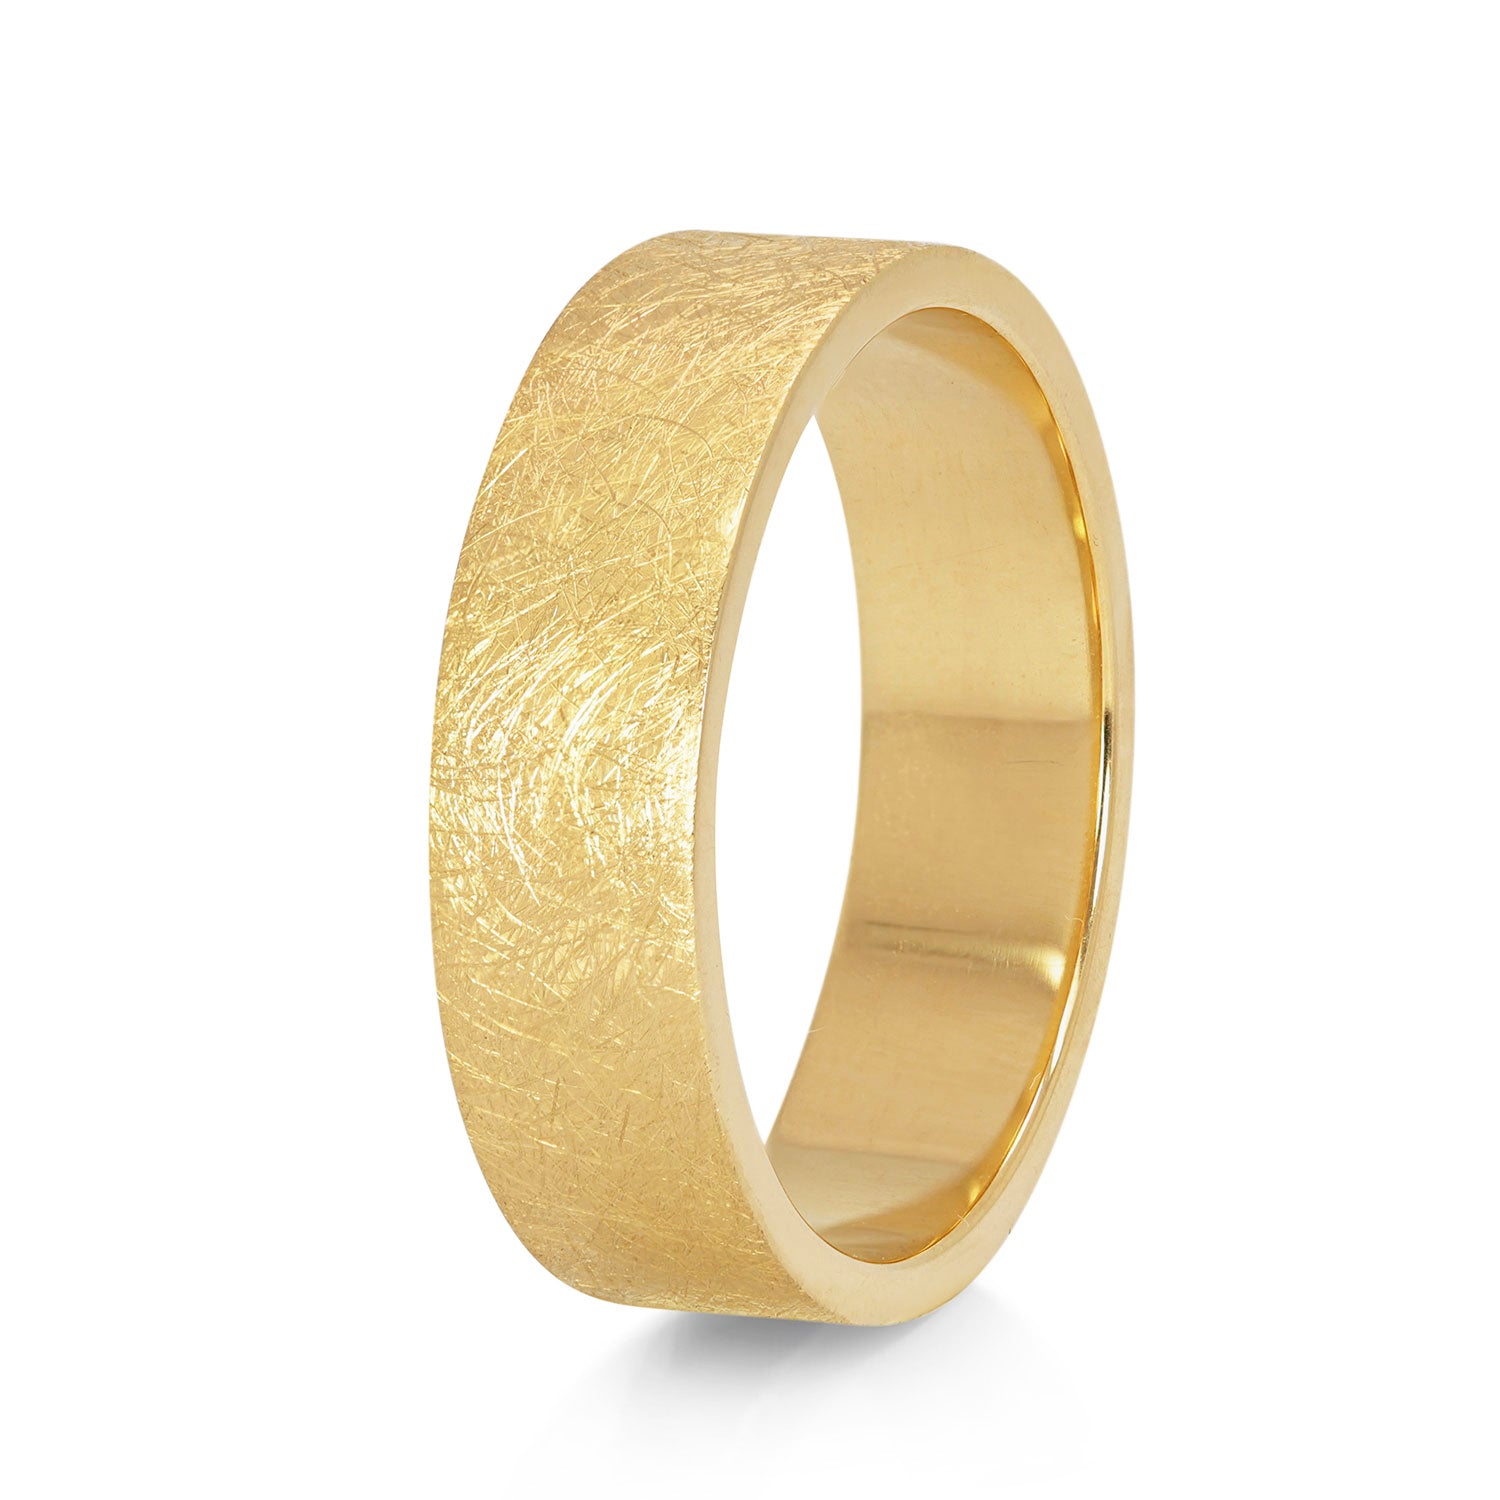 Bespoke Chrysta Distressed Alternative Wedding Band, 18ct Fairtrade Gold and Hand-Engraved Message